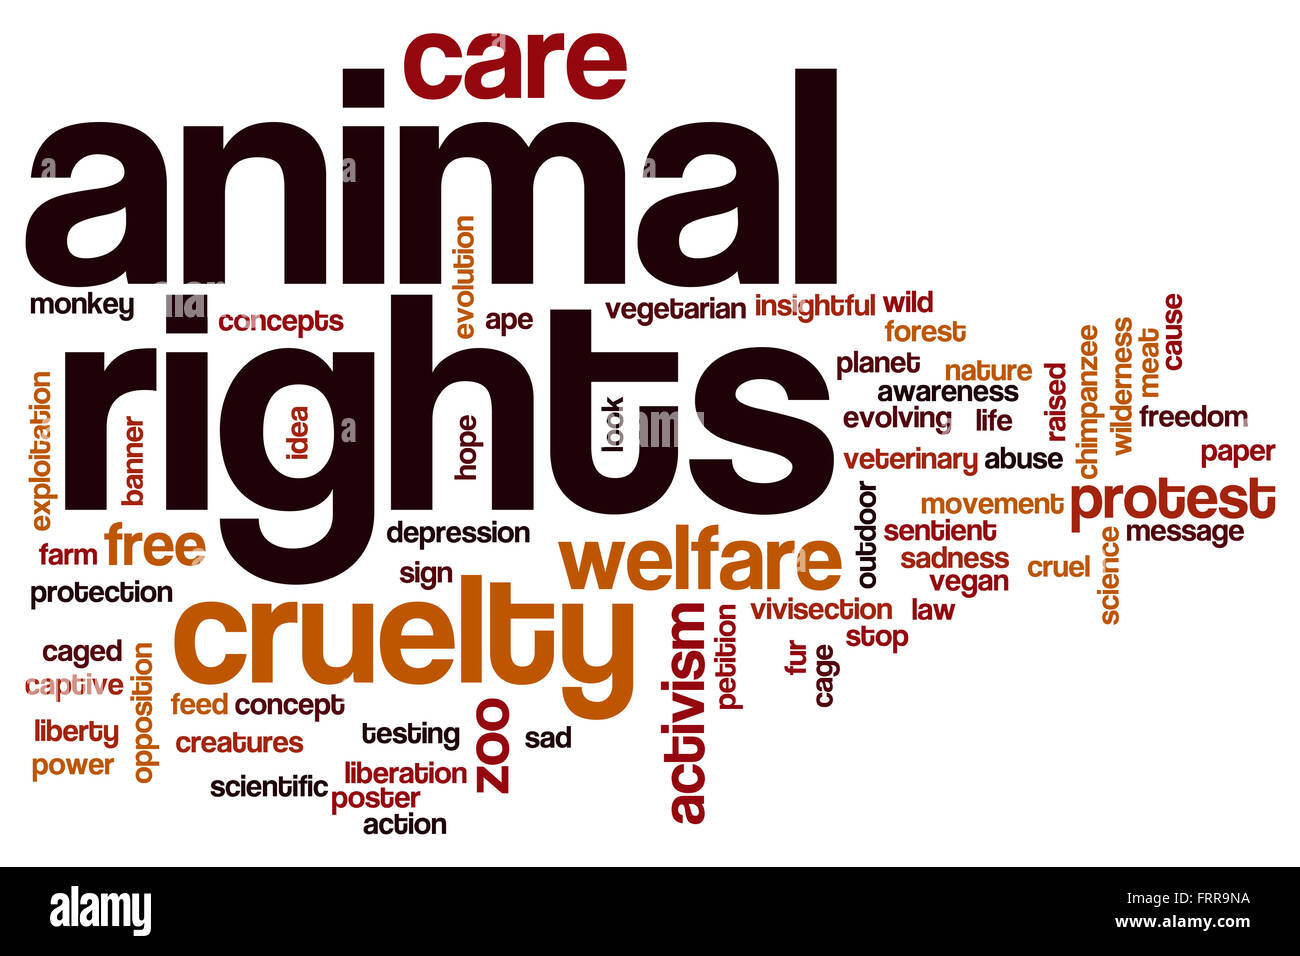 Animal rights word cloud concept Stock Photo